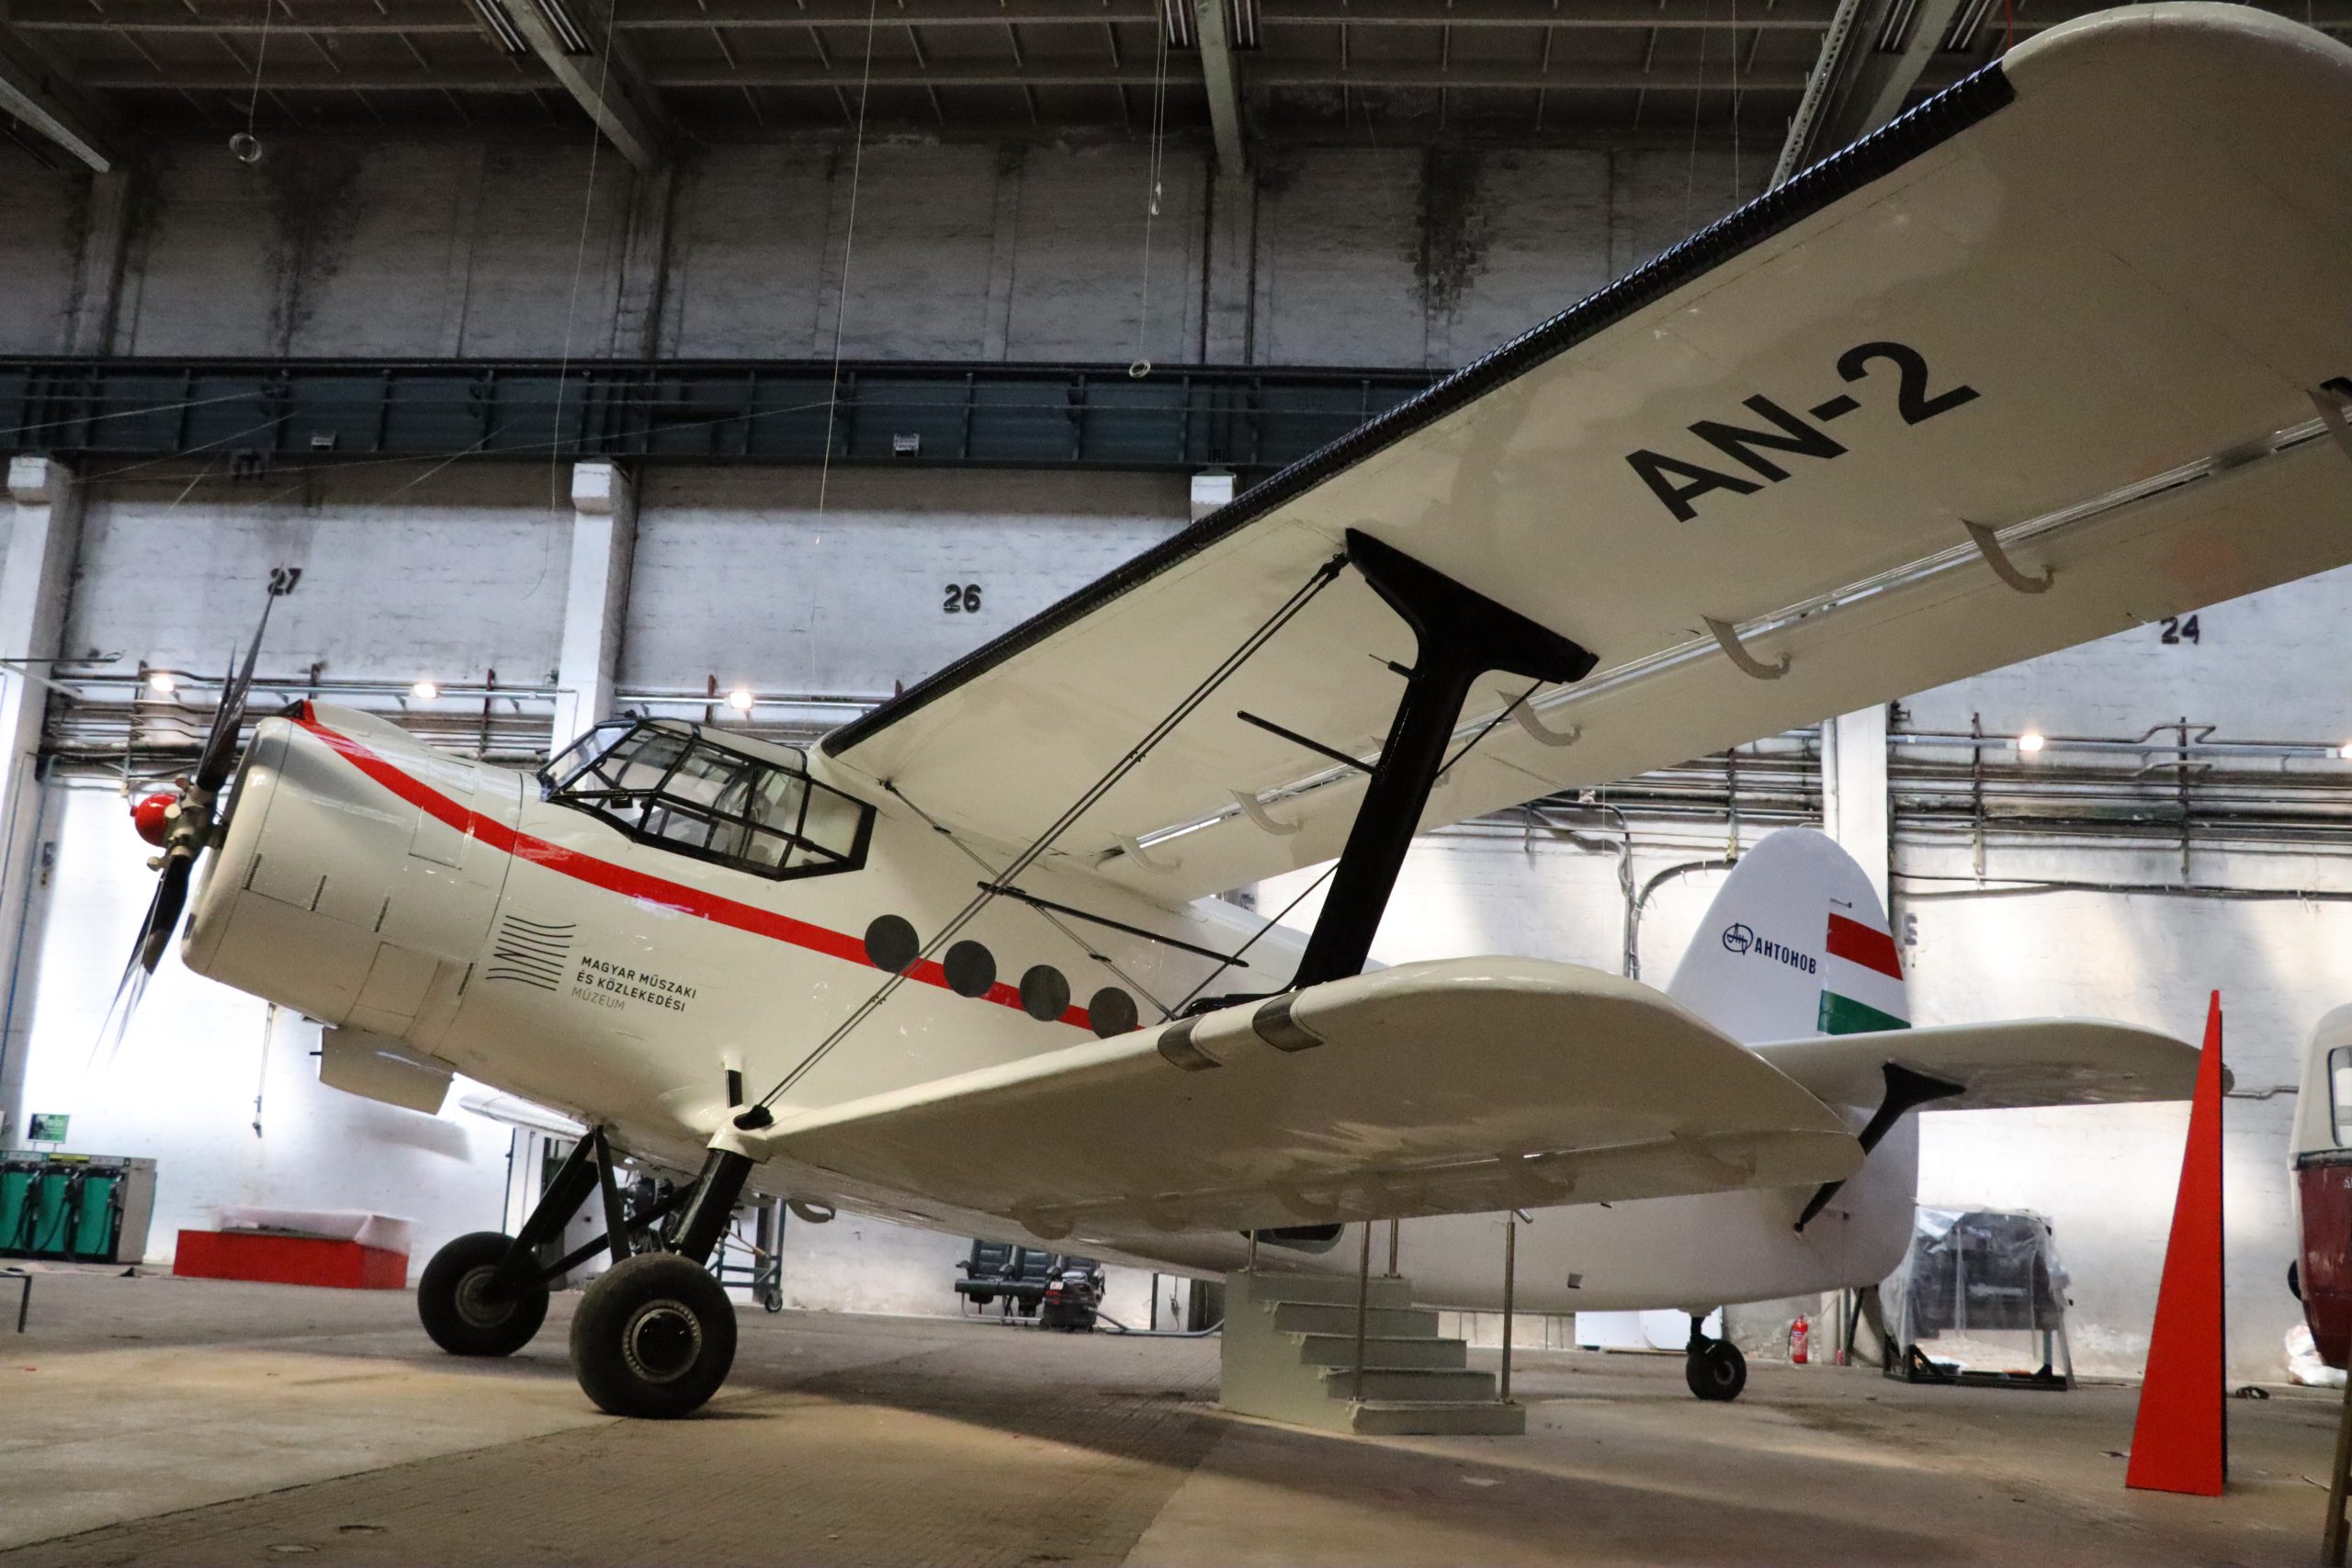 Aeroplex renovated the An-2 on the exhibit at the Museum of Transport